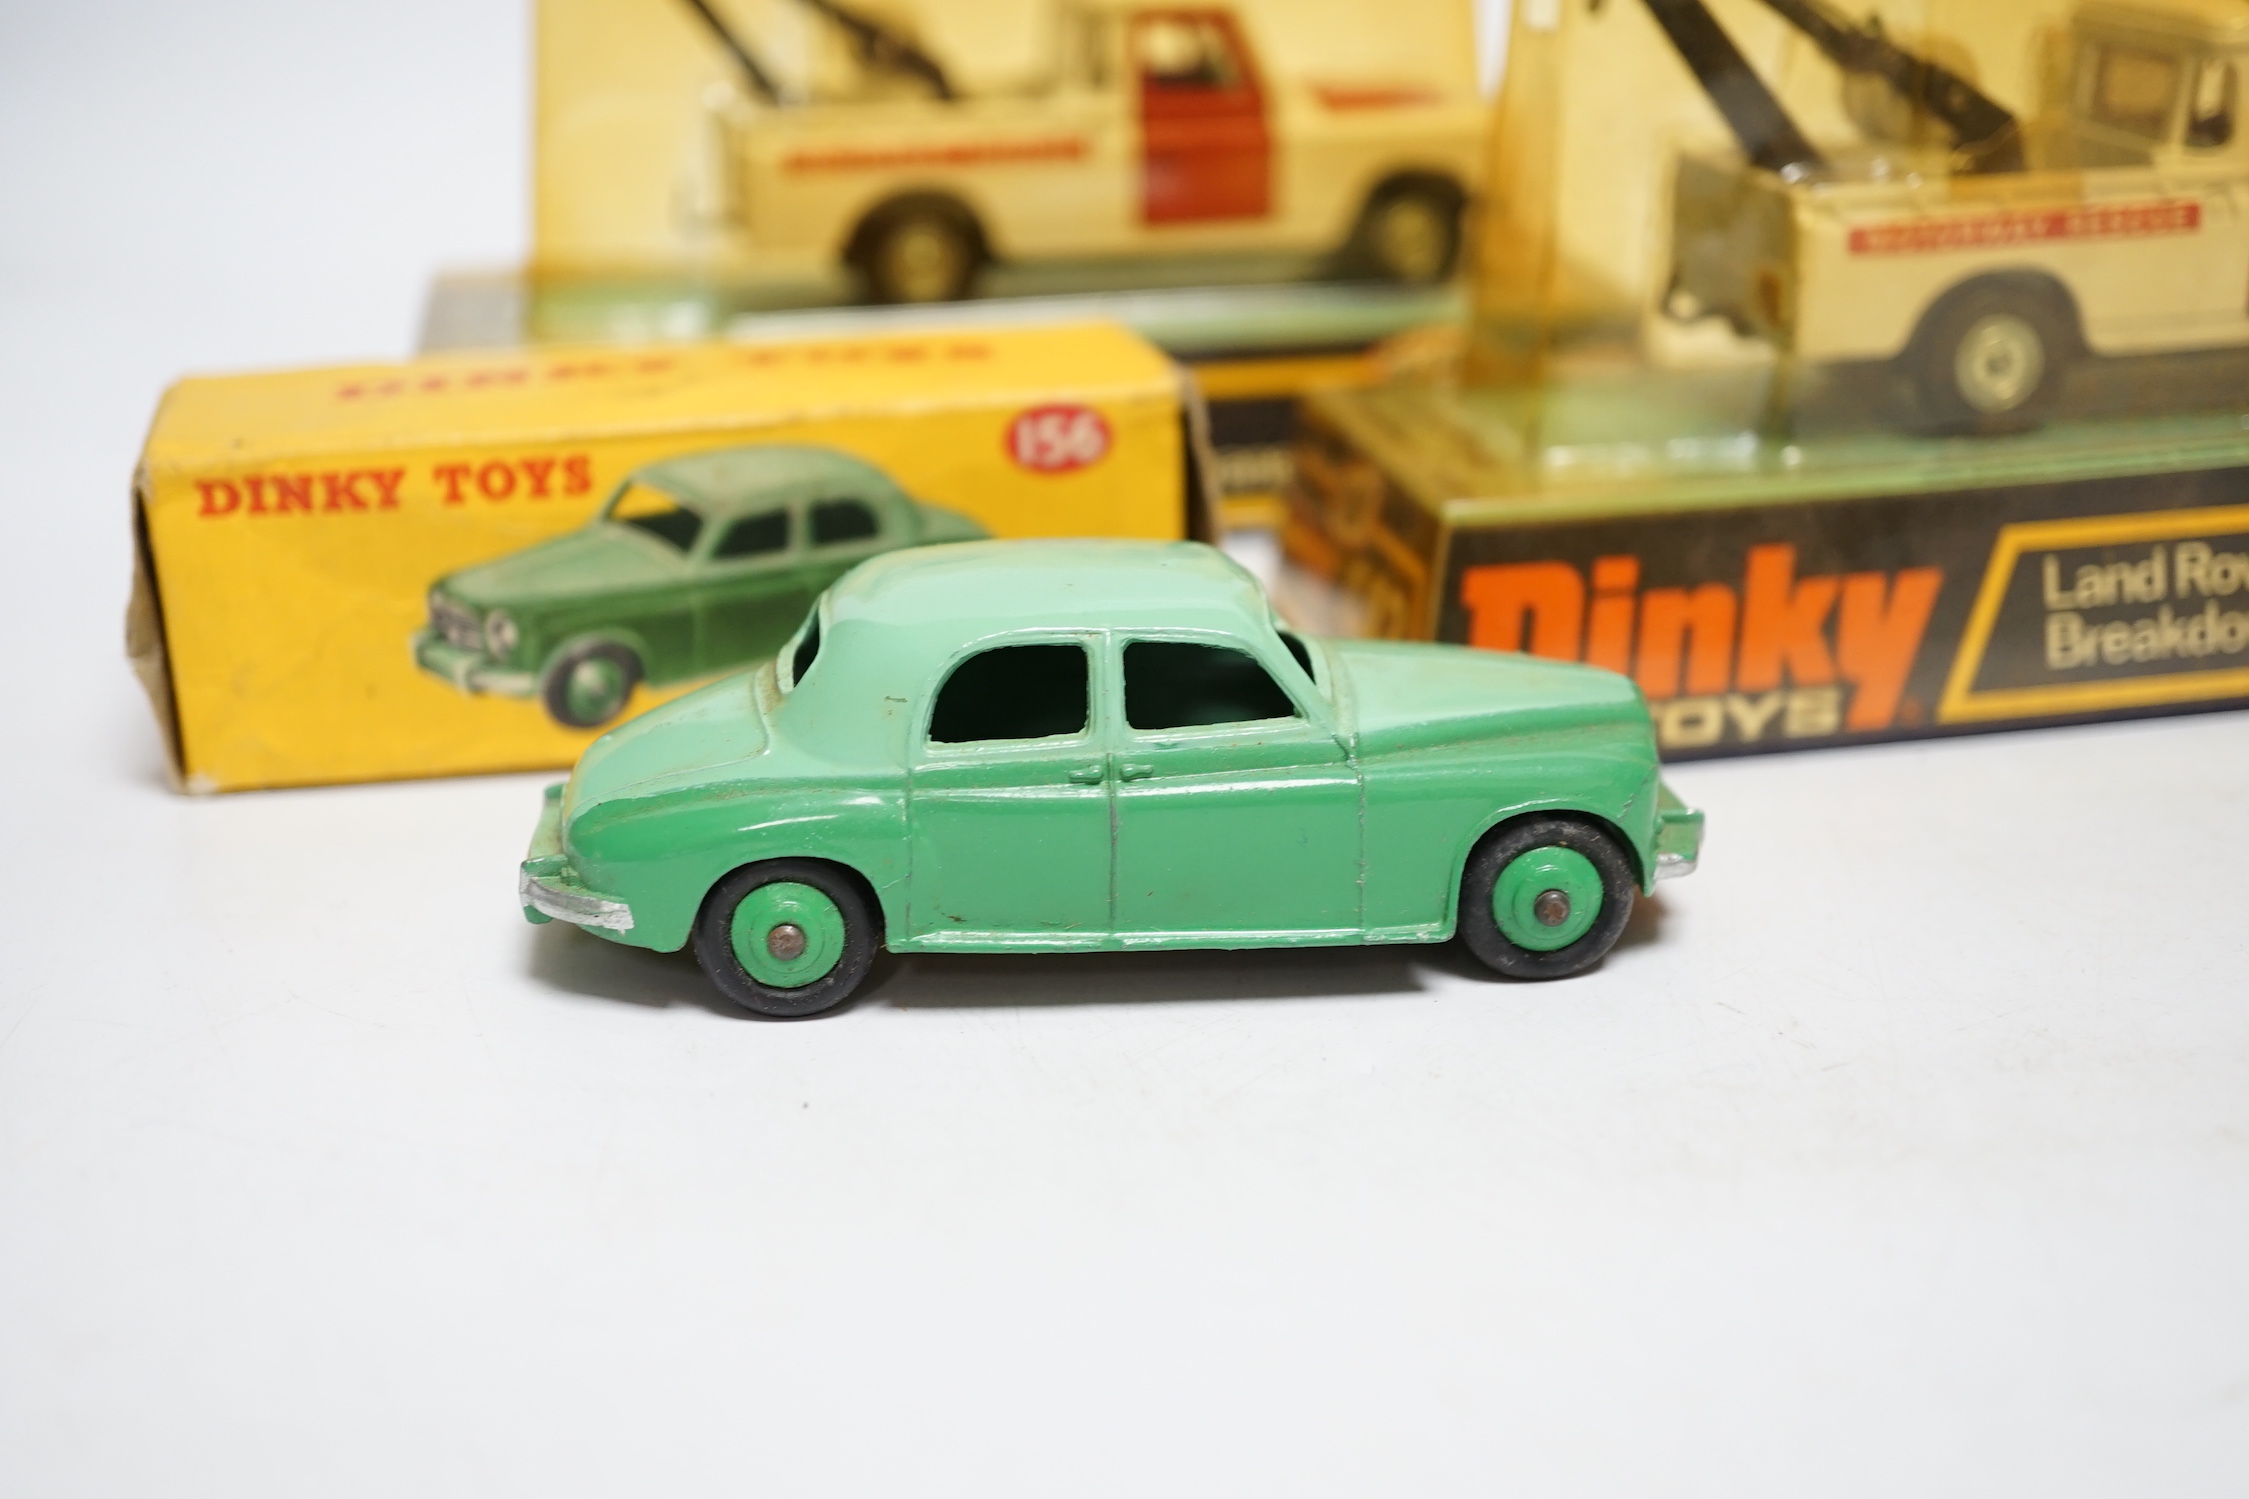 Five boxed Dinky Toys; Rover 75 Saloon (156) in correct two-tone green colour spot box, two Police Patrol Range Rover (254) and two Land Rover Breakdown Crane (442)